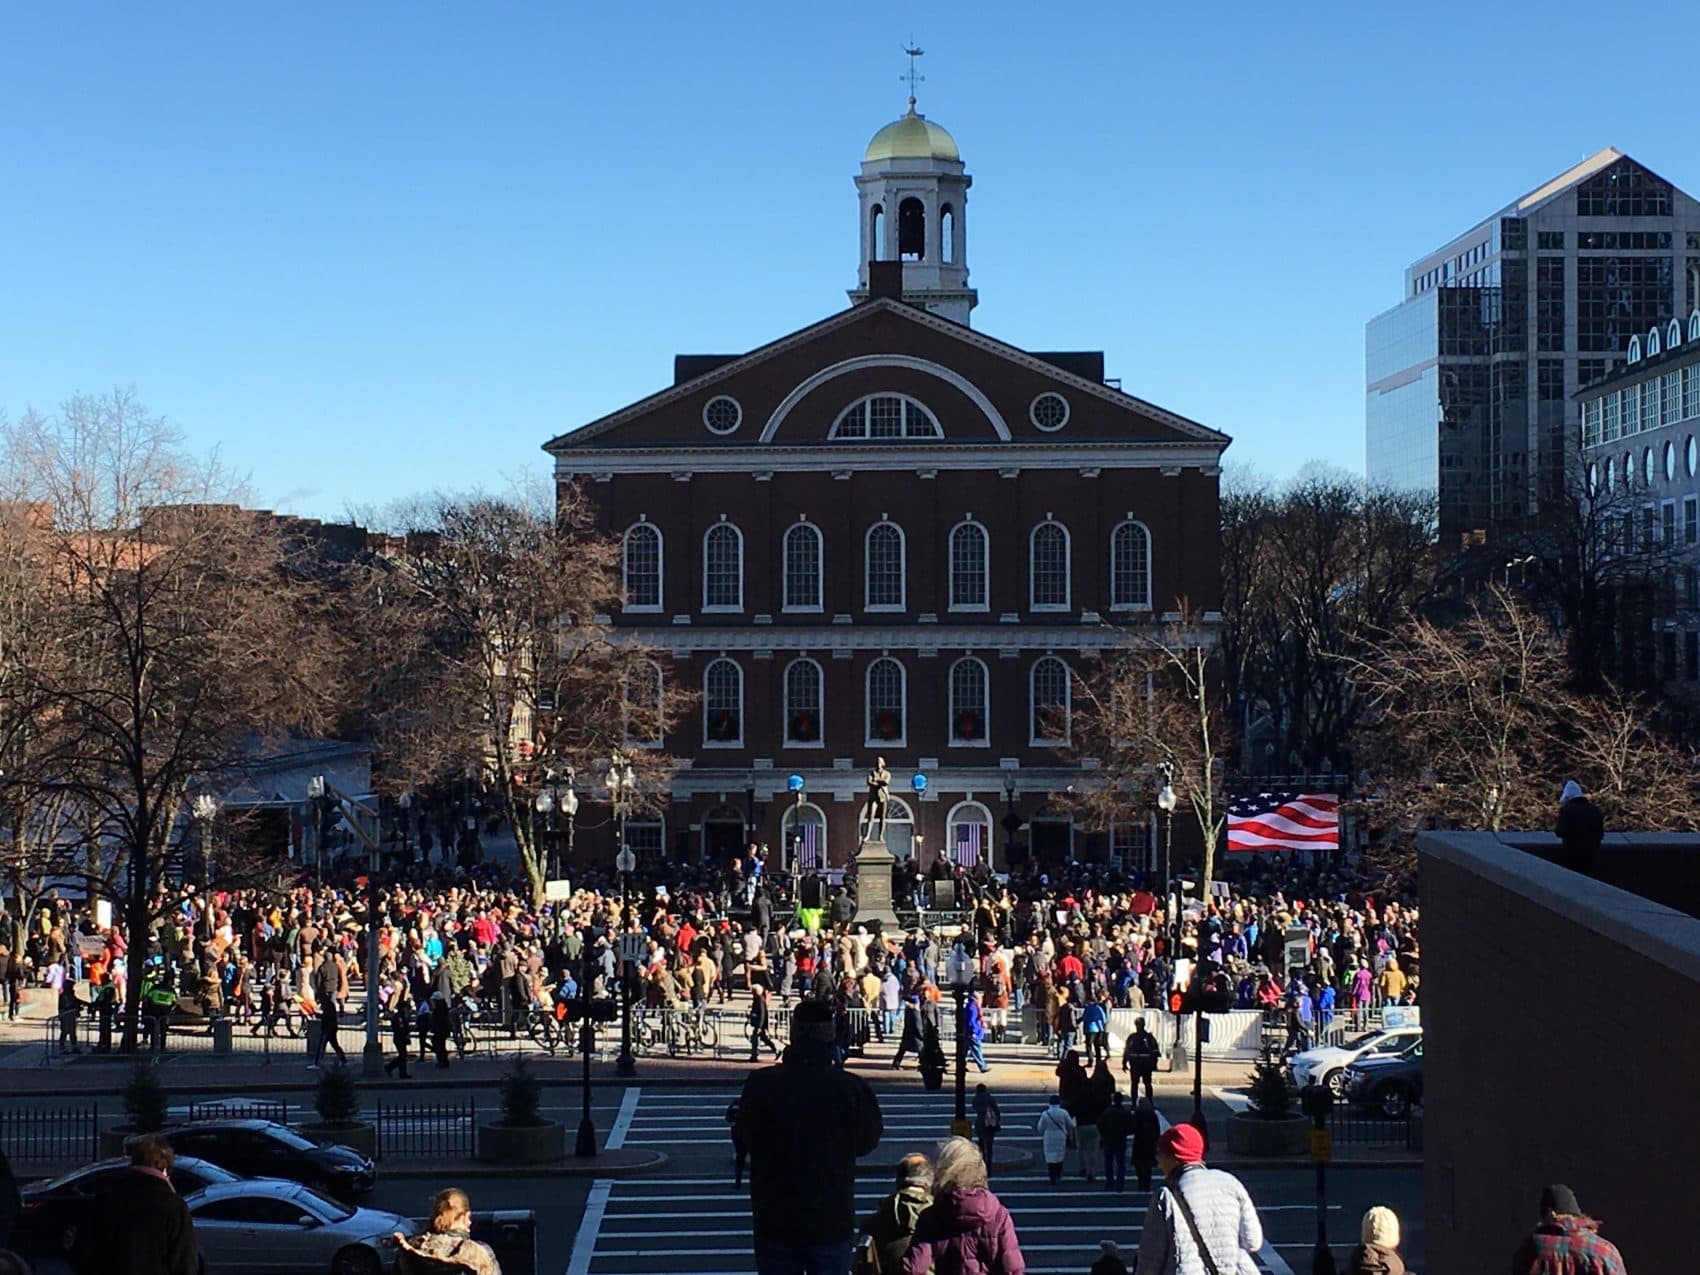 On Sunday, almost the entire Massachusetts congressional delegation participated in a rally at Faneuil Hall in support of the Affordable Care Act. Similar rallies in support of President Obama's signature healthcare law also occured throughout the country Sunday. (Qainat Khan/WBUR)